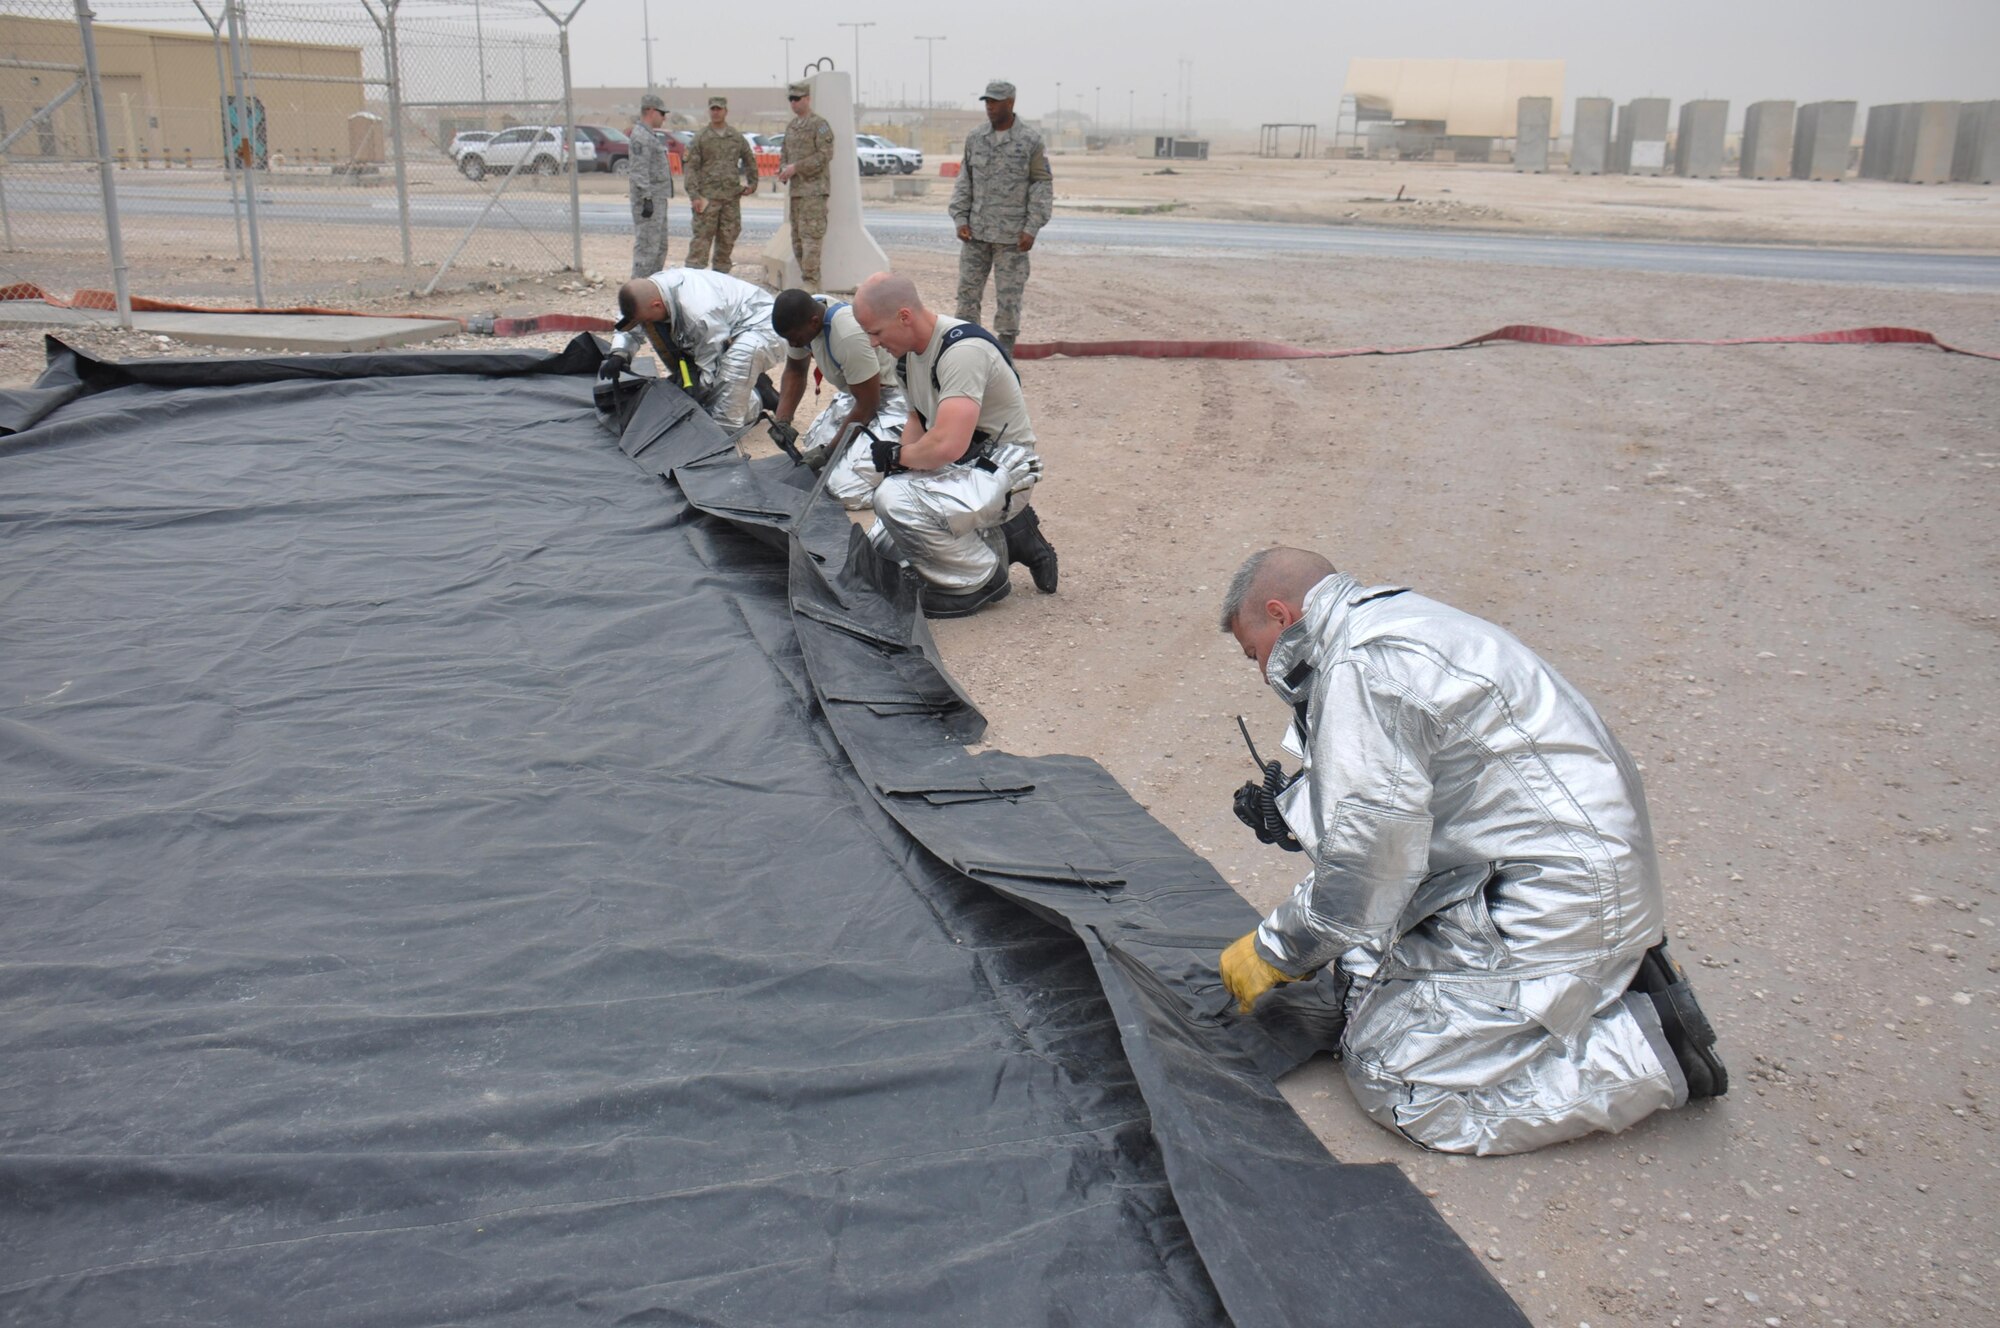 Firefighters assigned to the 379th Expeditionary Civil Engineer Squadron work to set up a decontamination processing area during a hazardous materials exercise at Al Udeid Air Base, Qatar March 16. The training exercise, which featured mock explosives and chemicals, provided first responders an opportunity to practice reacting to an emergency incident. Several emergency personnel participated in the exercise including explosive ordnance technicians, security forces and medics. (U.S. Air Force photo by Tech. Sgt. James Hodgman/Released)